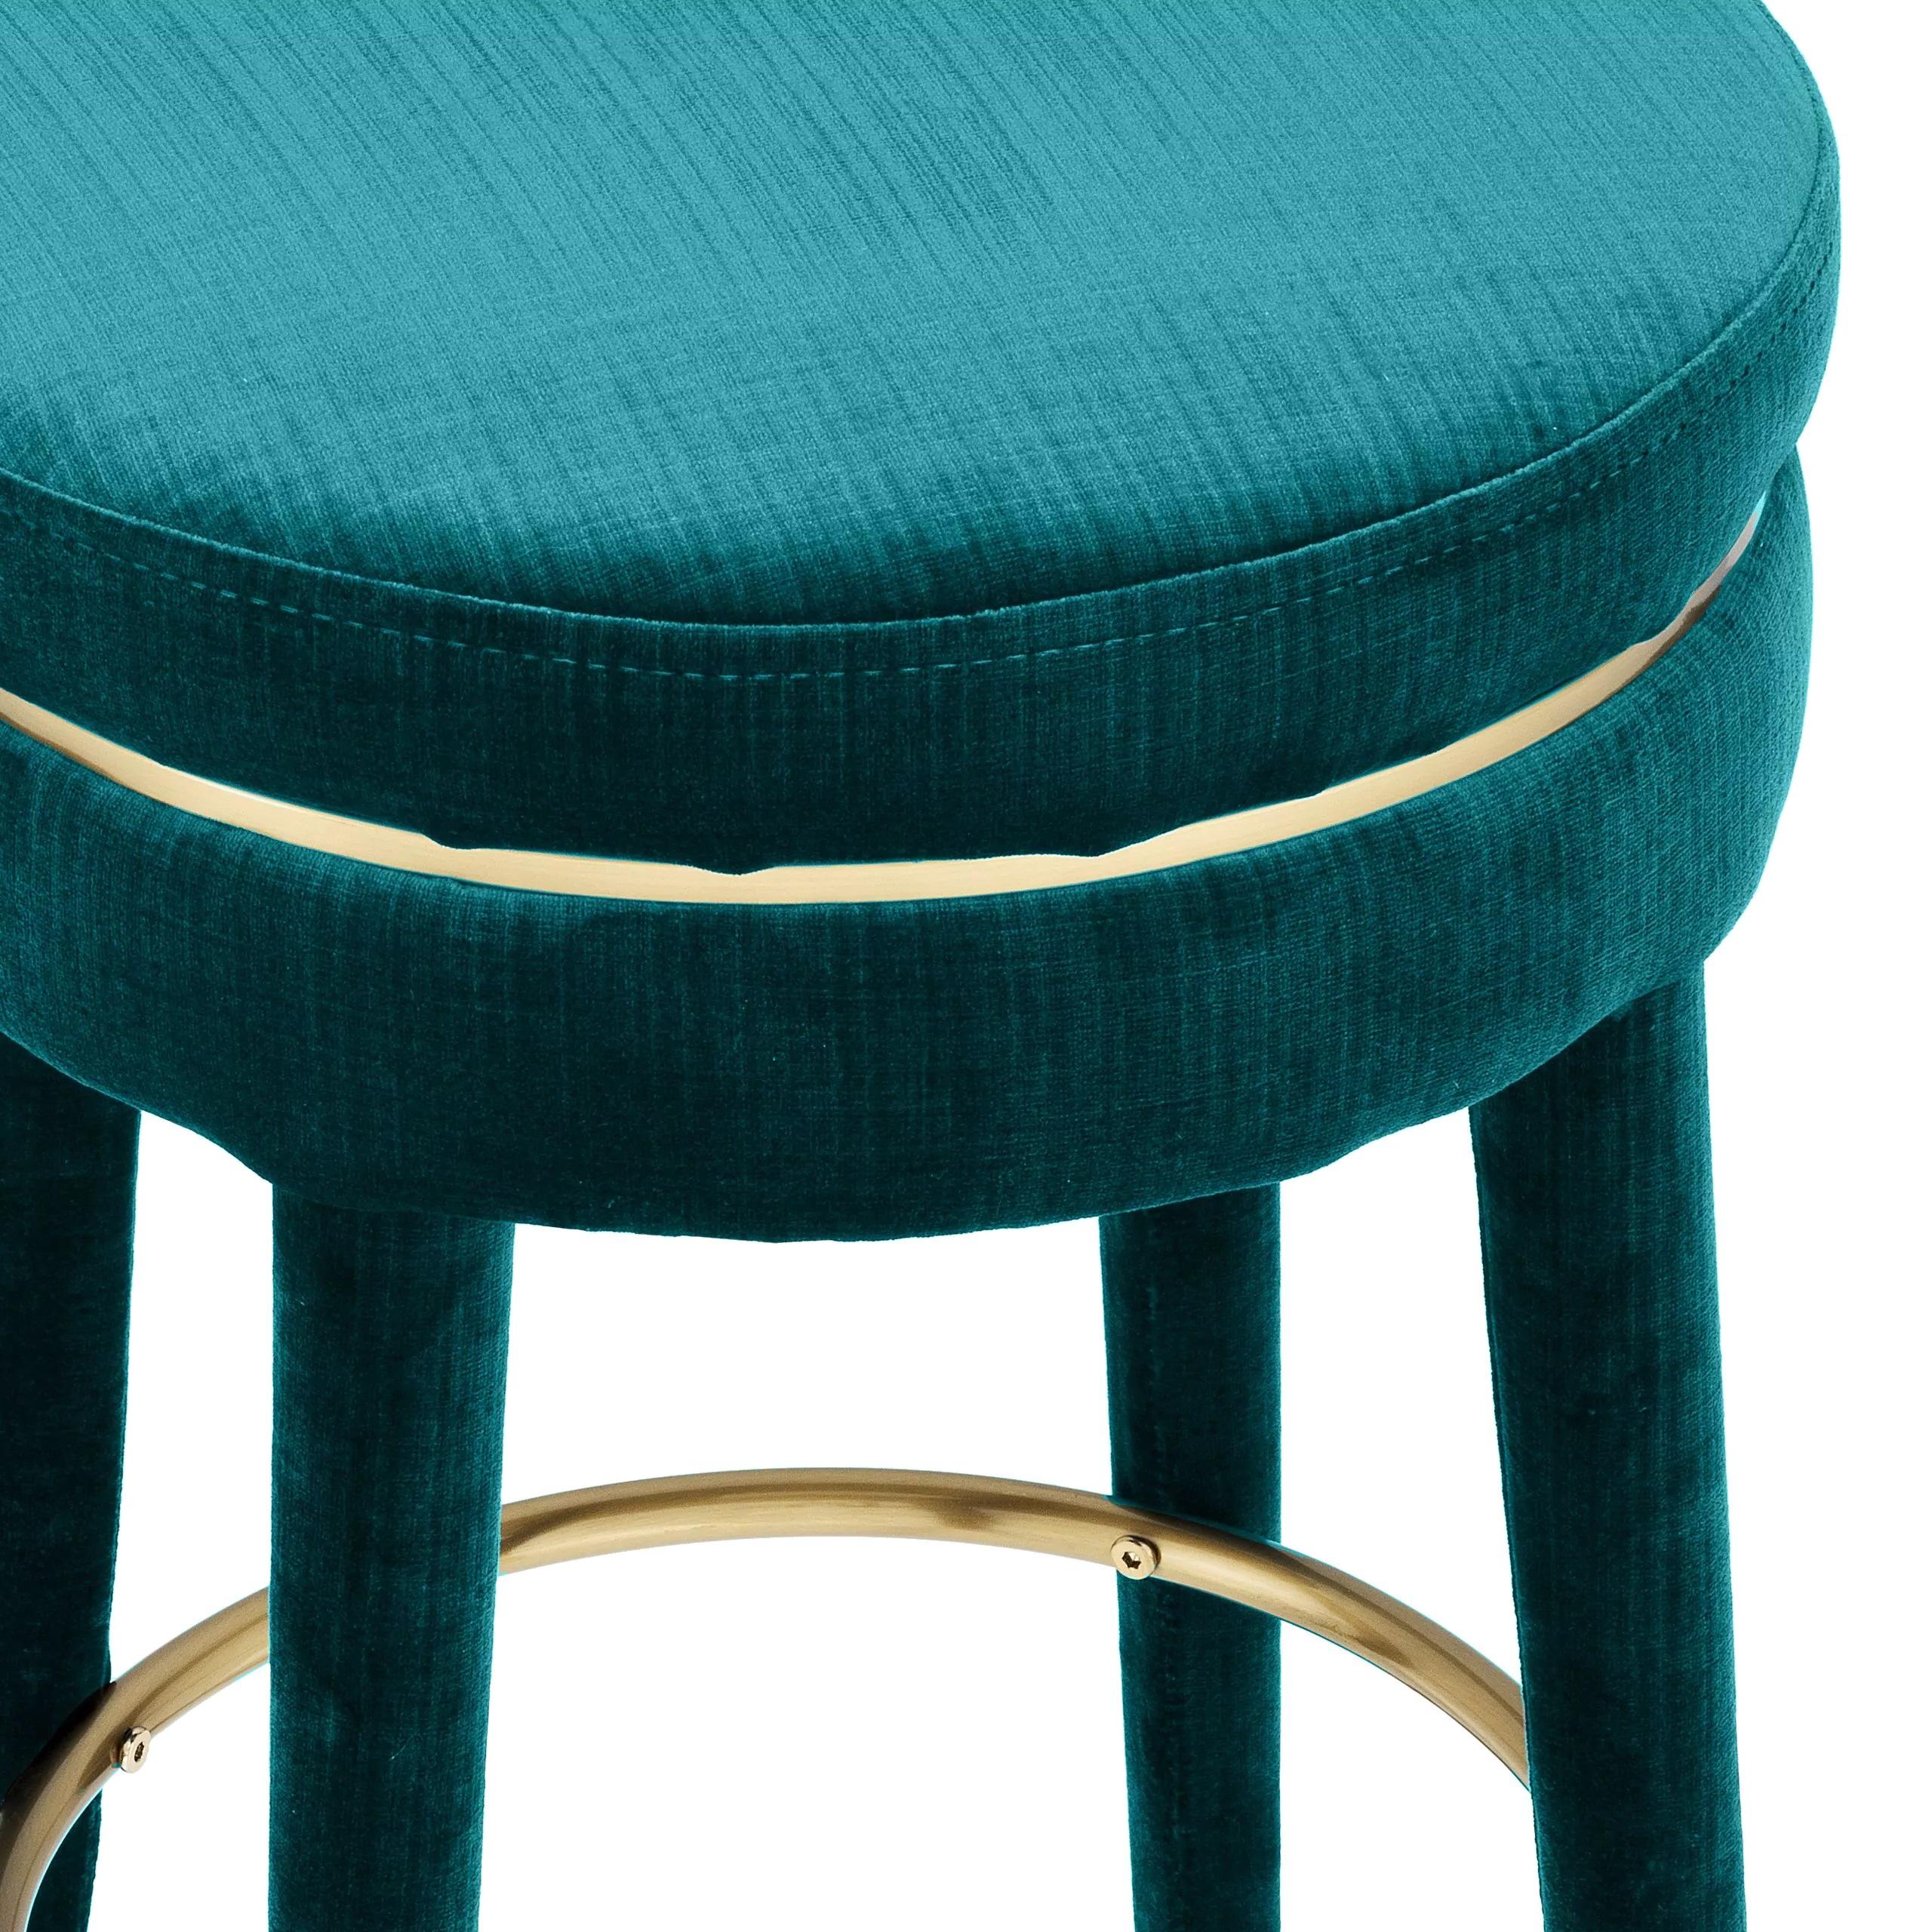 French 1930s-1940s Design Style All In Blue Velvet And Brass Finishes Round Shaped Counter Stool.